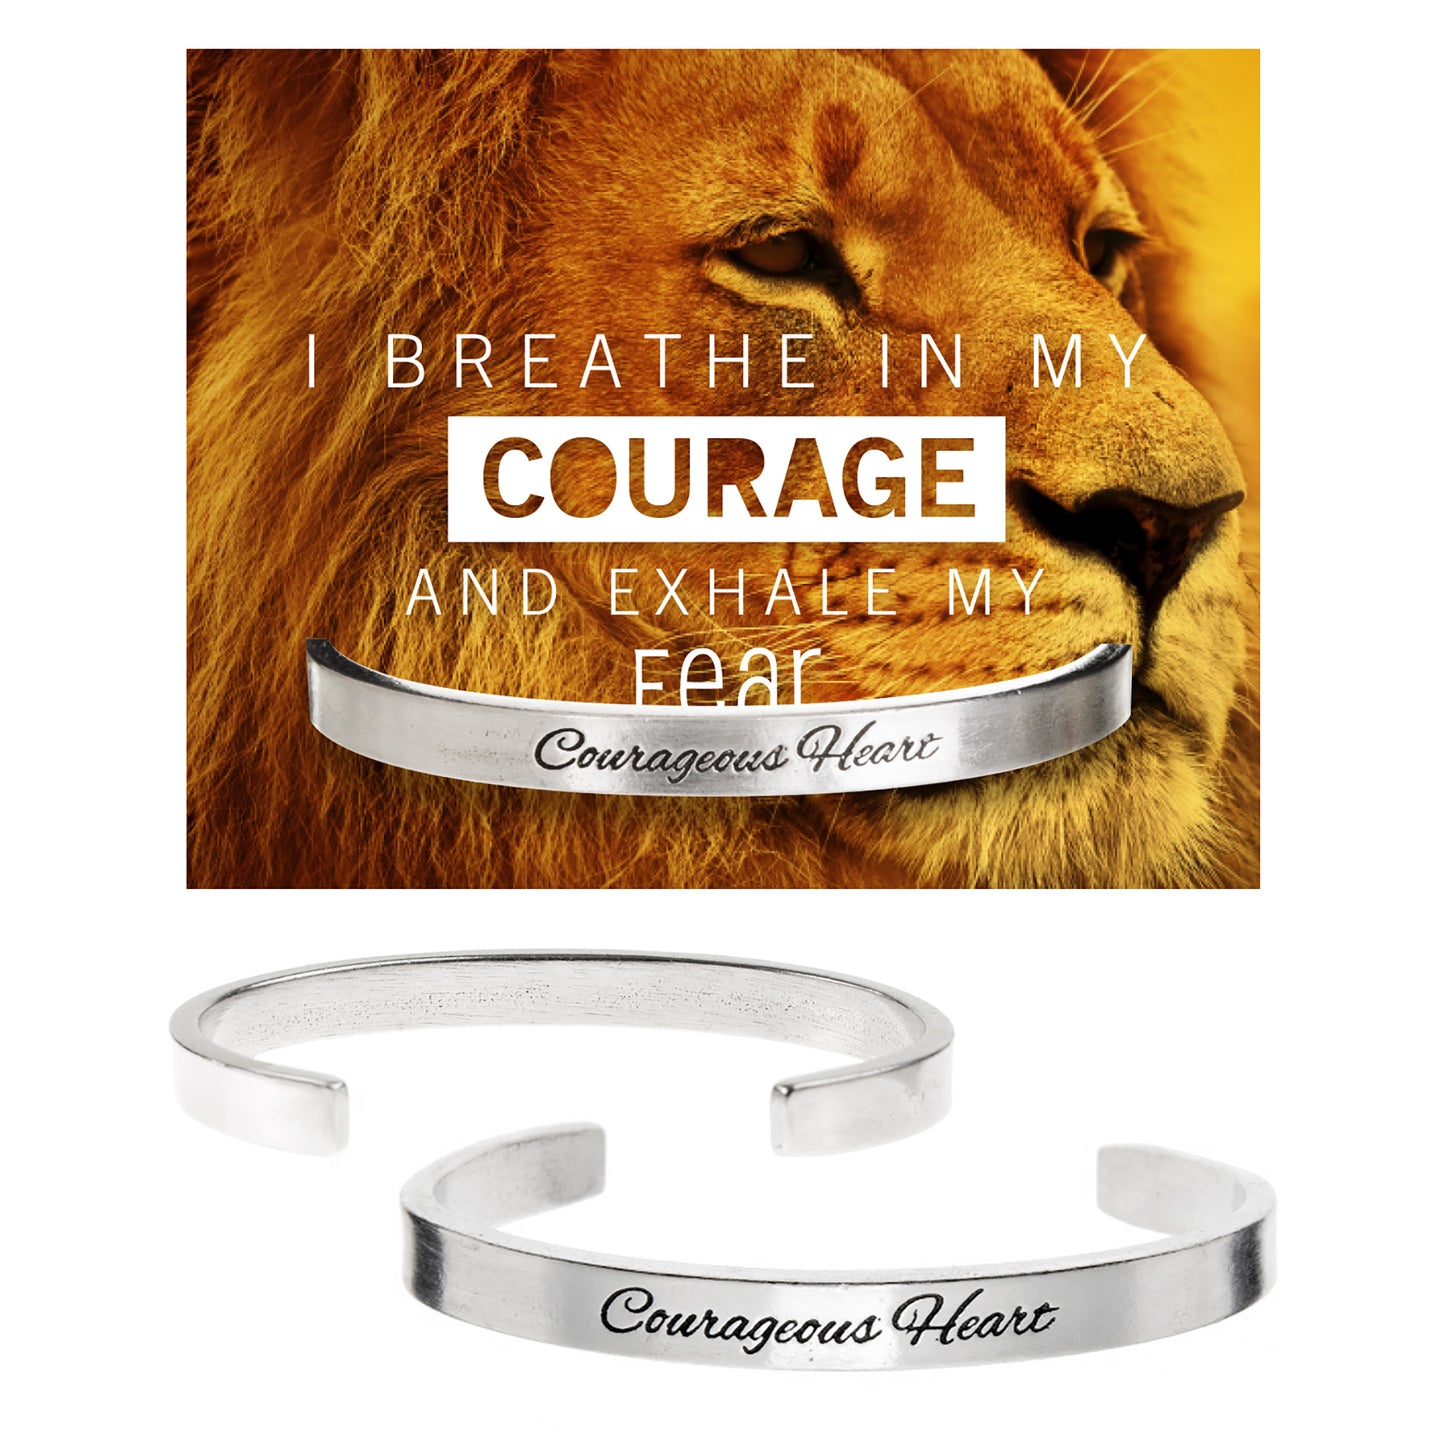 Courageous Heart Quotable Cuff Bracelet on Courage Backer Card